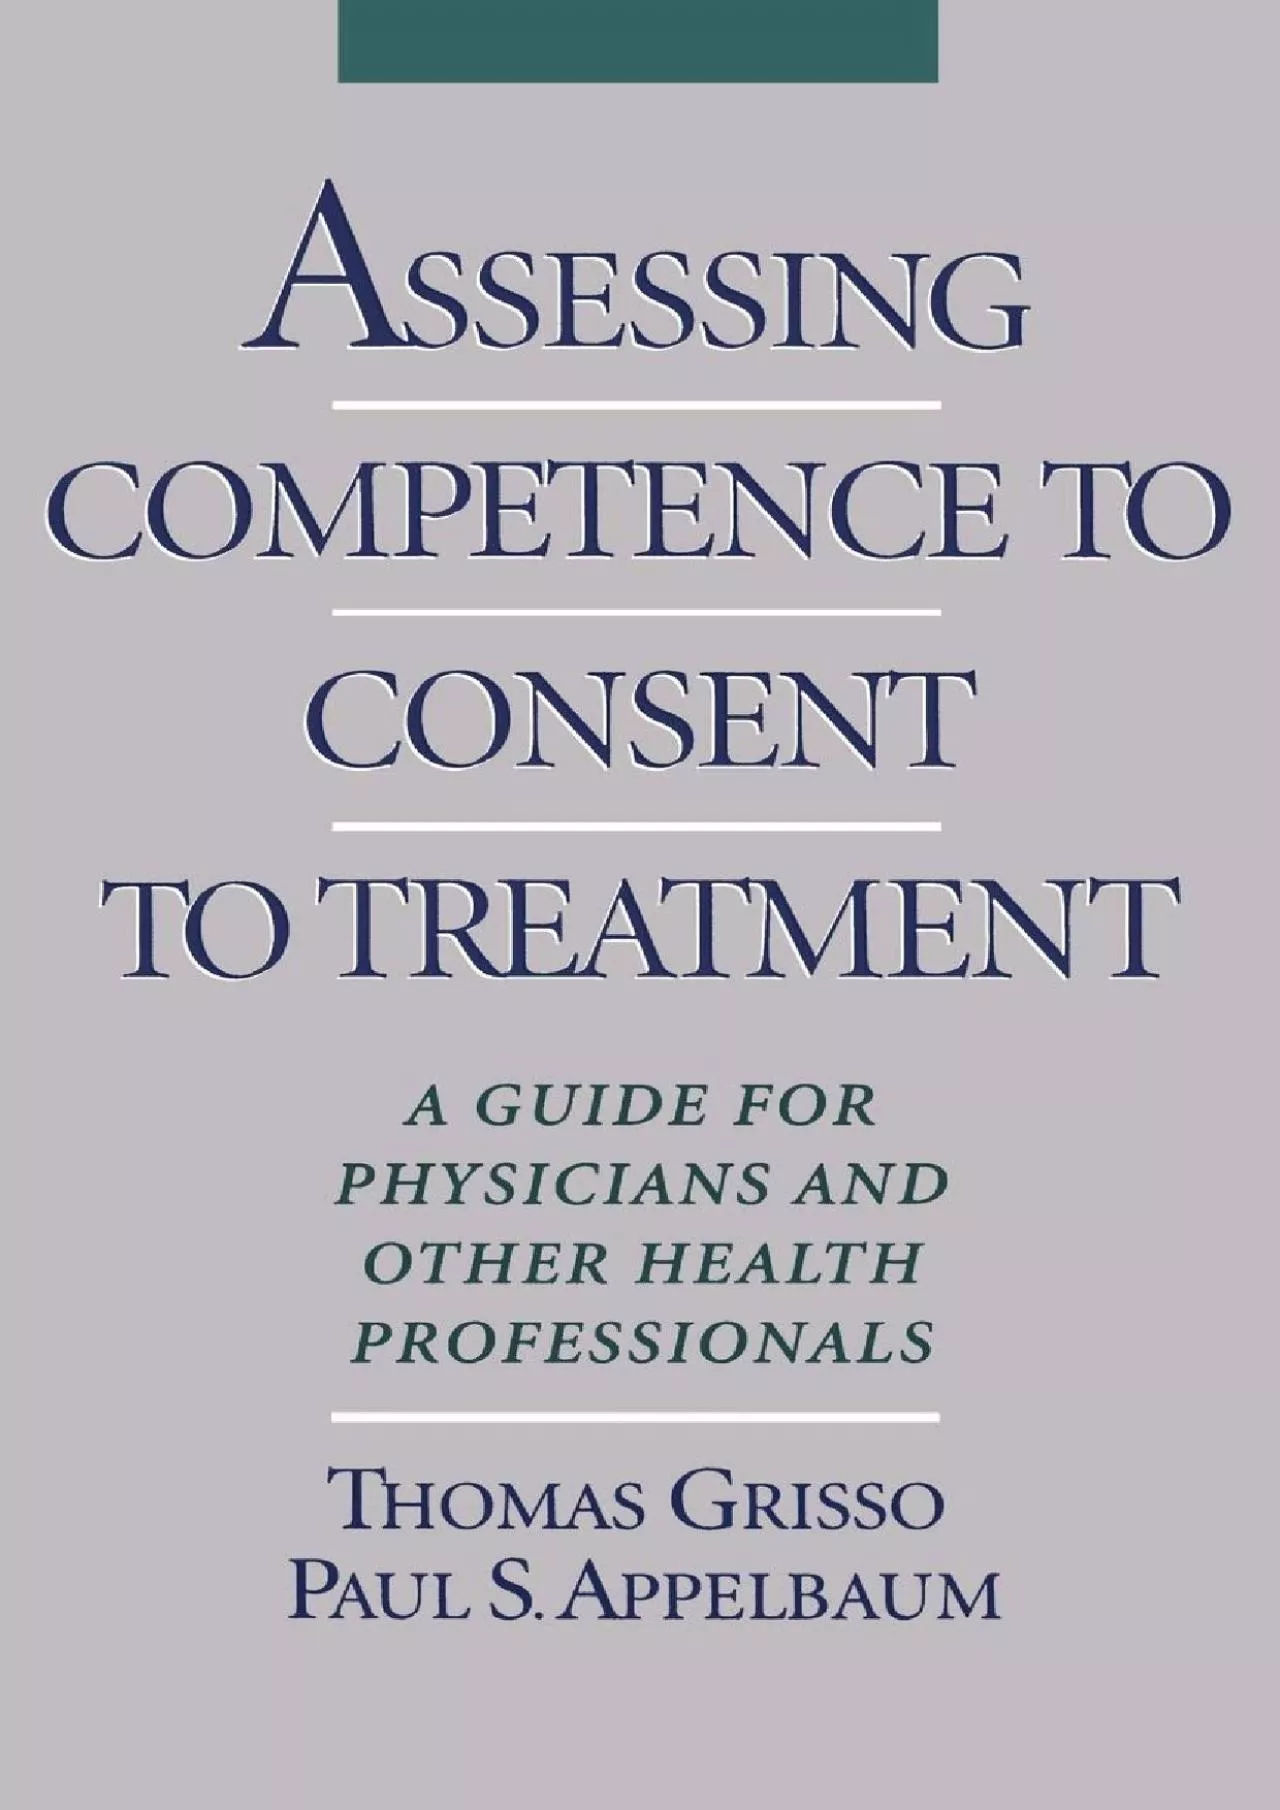 (BOOS)-Assessing Competence to Consent to Treatment: A Guide for Physicians and Other